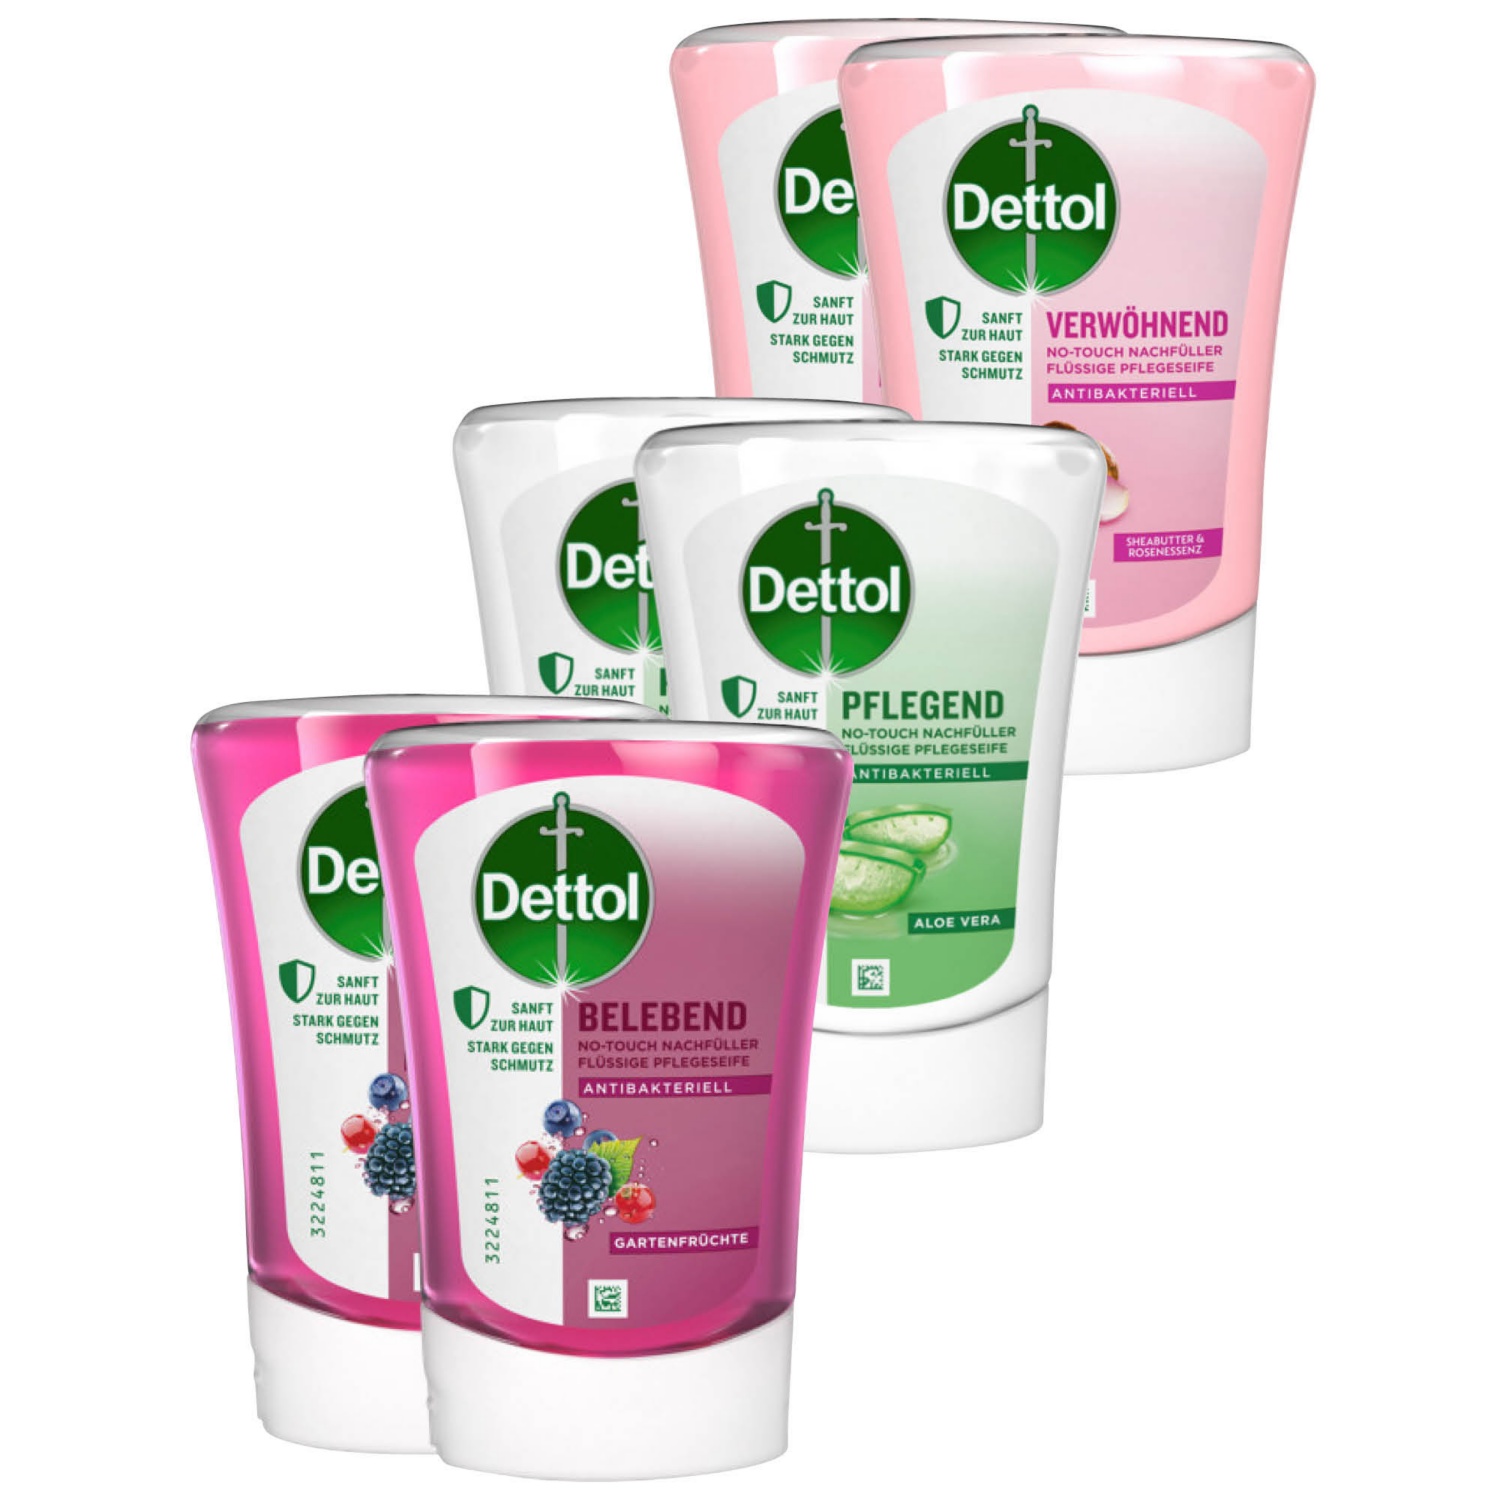 DETTOL Ricarica No-Touch